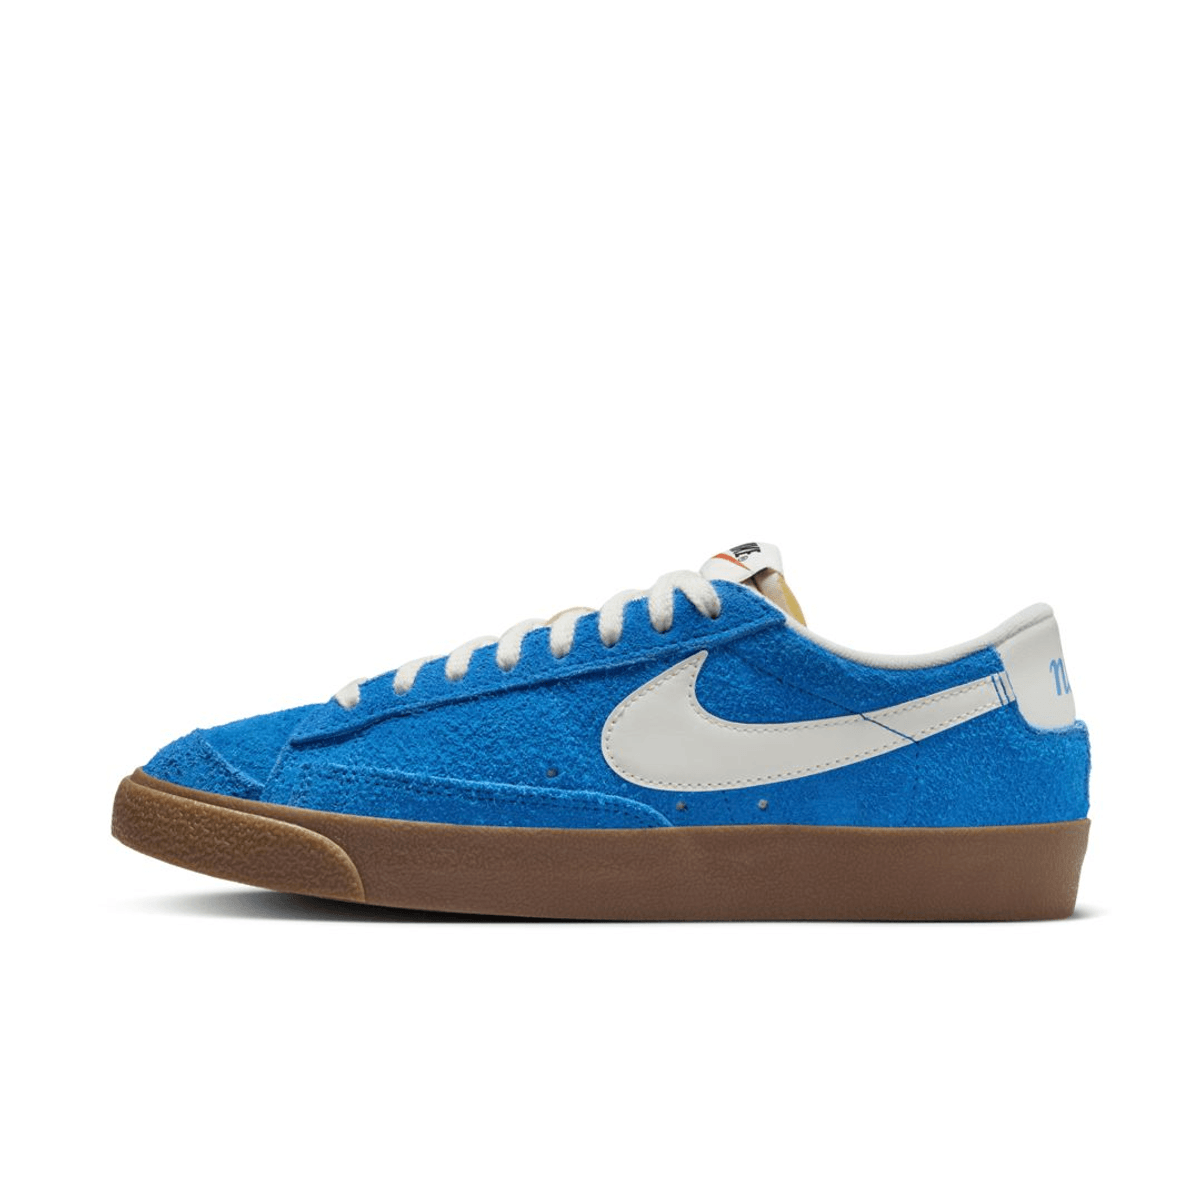 Official Images Of The Nike Blazer Low ’77 “Blue Suede”